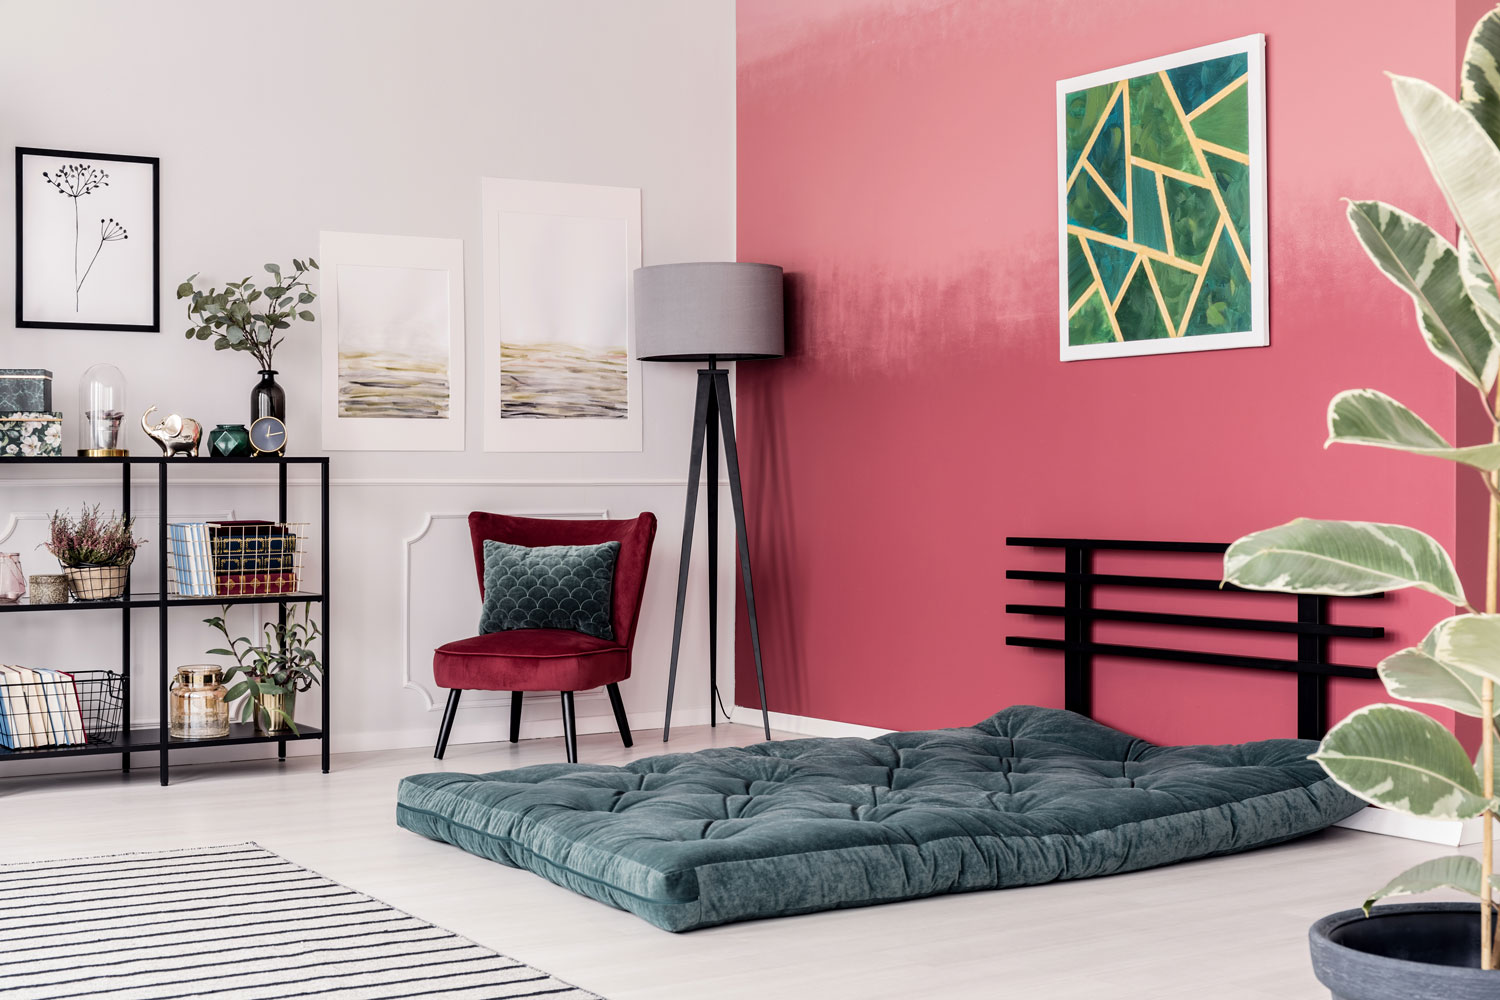 Emerald green futon with pink pillows on the floor against red, ombre wall in elegant living room interior with gray lamp and velvet chair, 11 Great Colors That Go Well With Burgundy